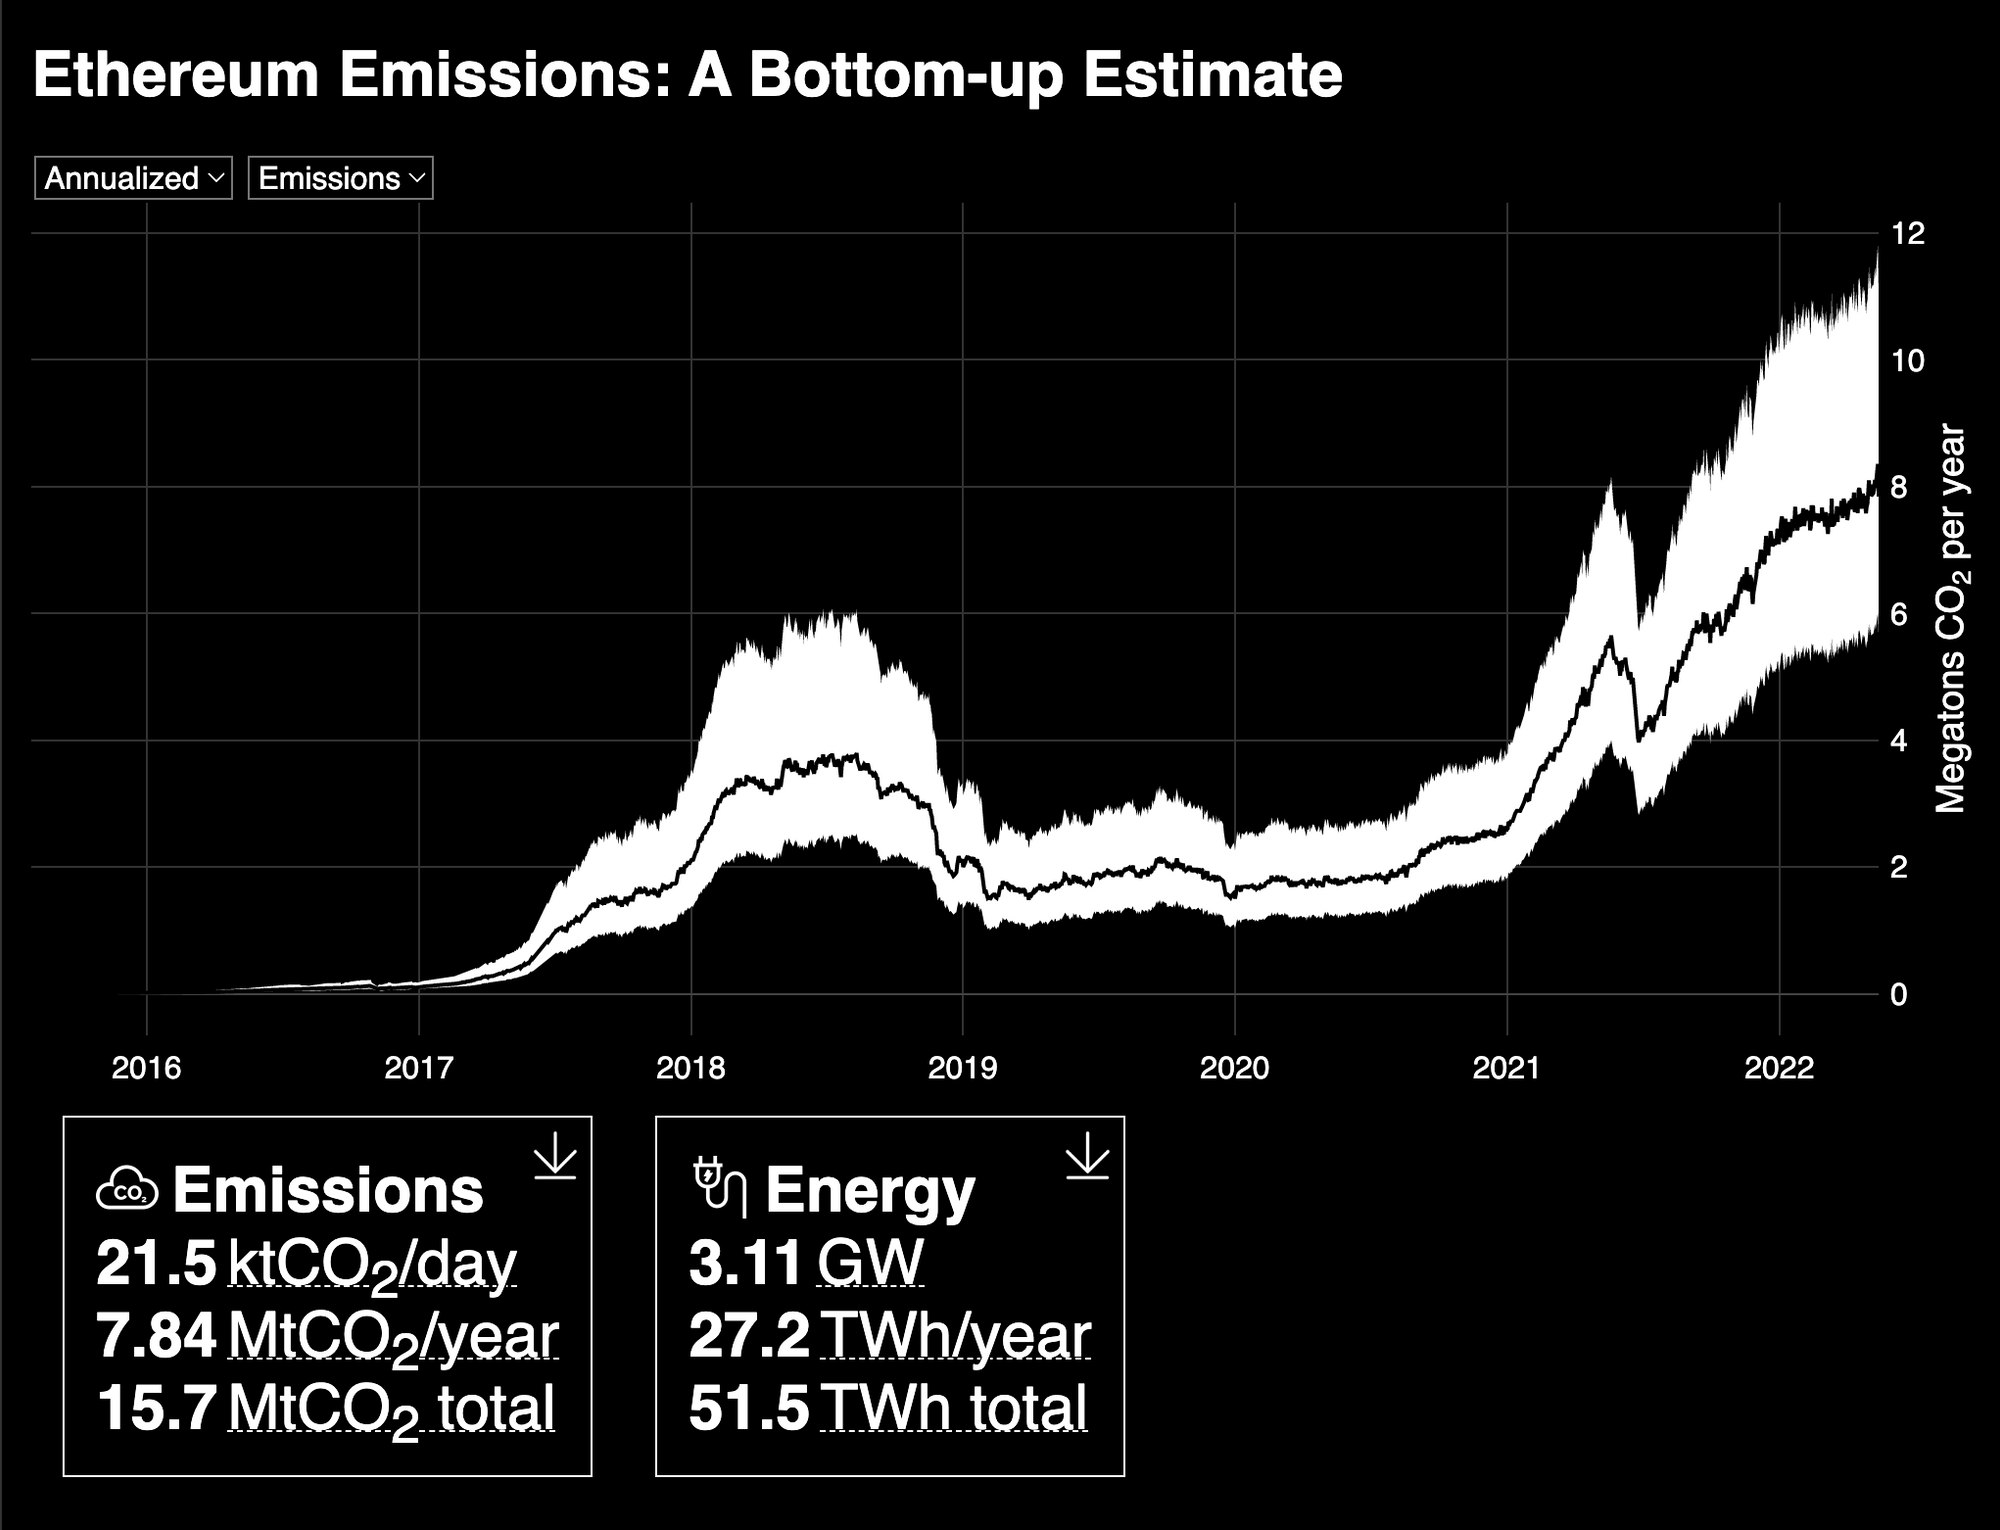 Graph showing volatile emissions since 2017, then steadily rising from 2021 to 2022, peaking around 8 million tons CO2 per year and 27 terawatt hours per year.